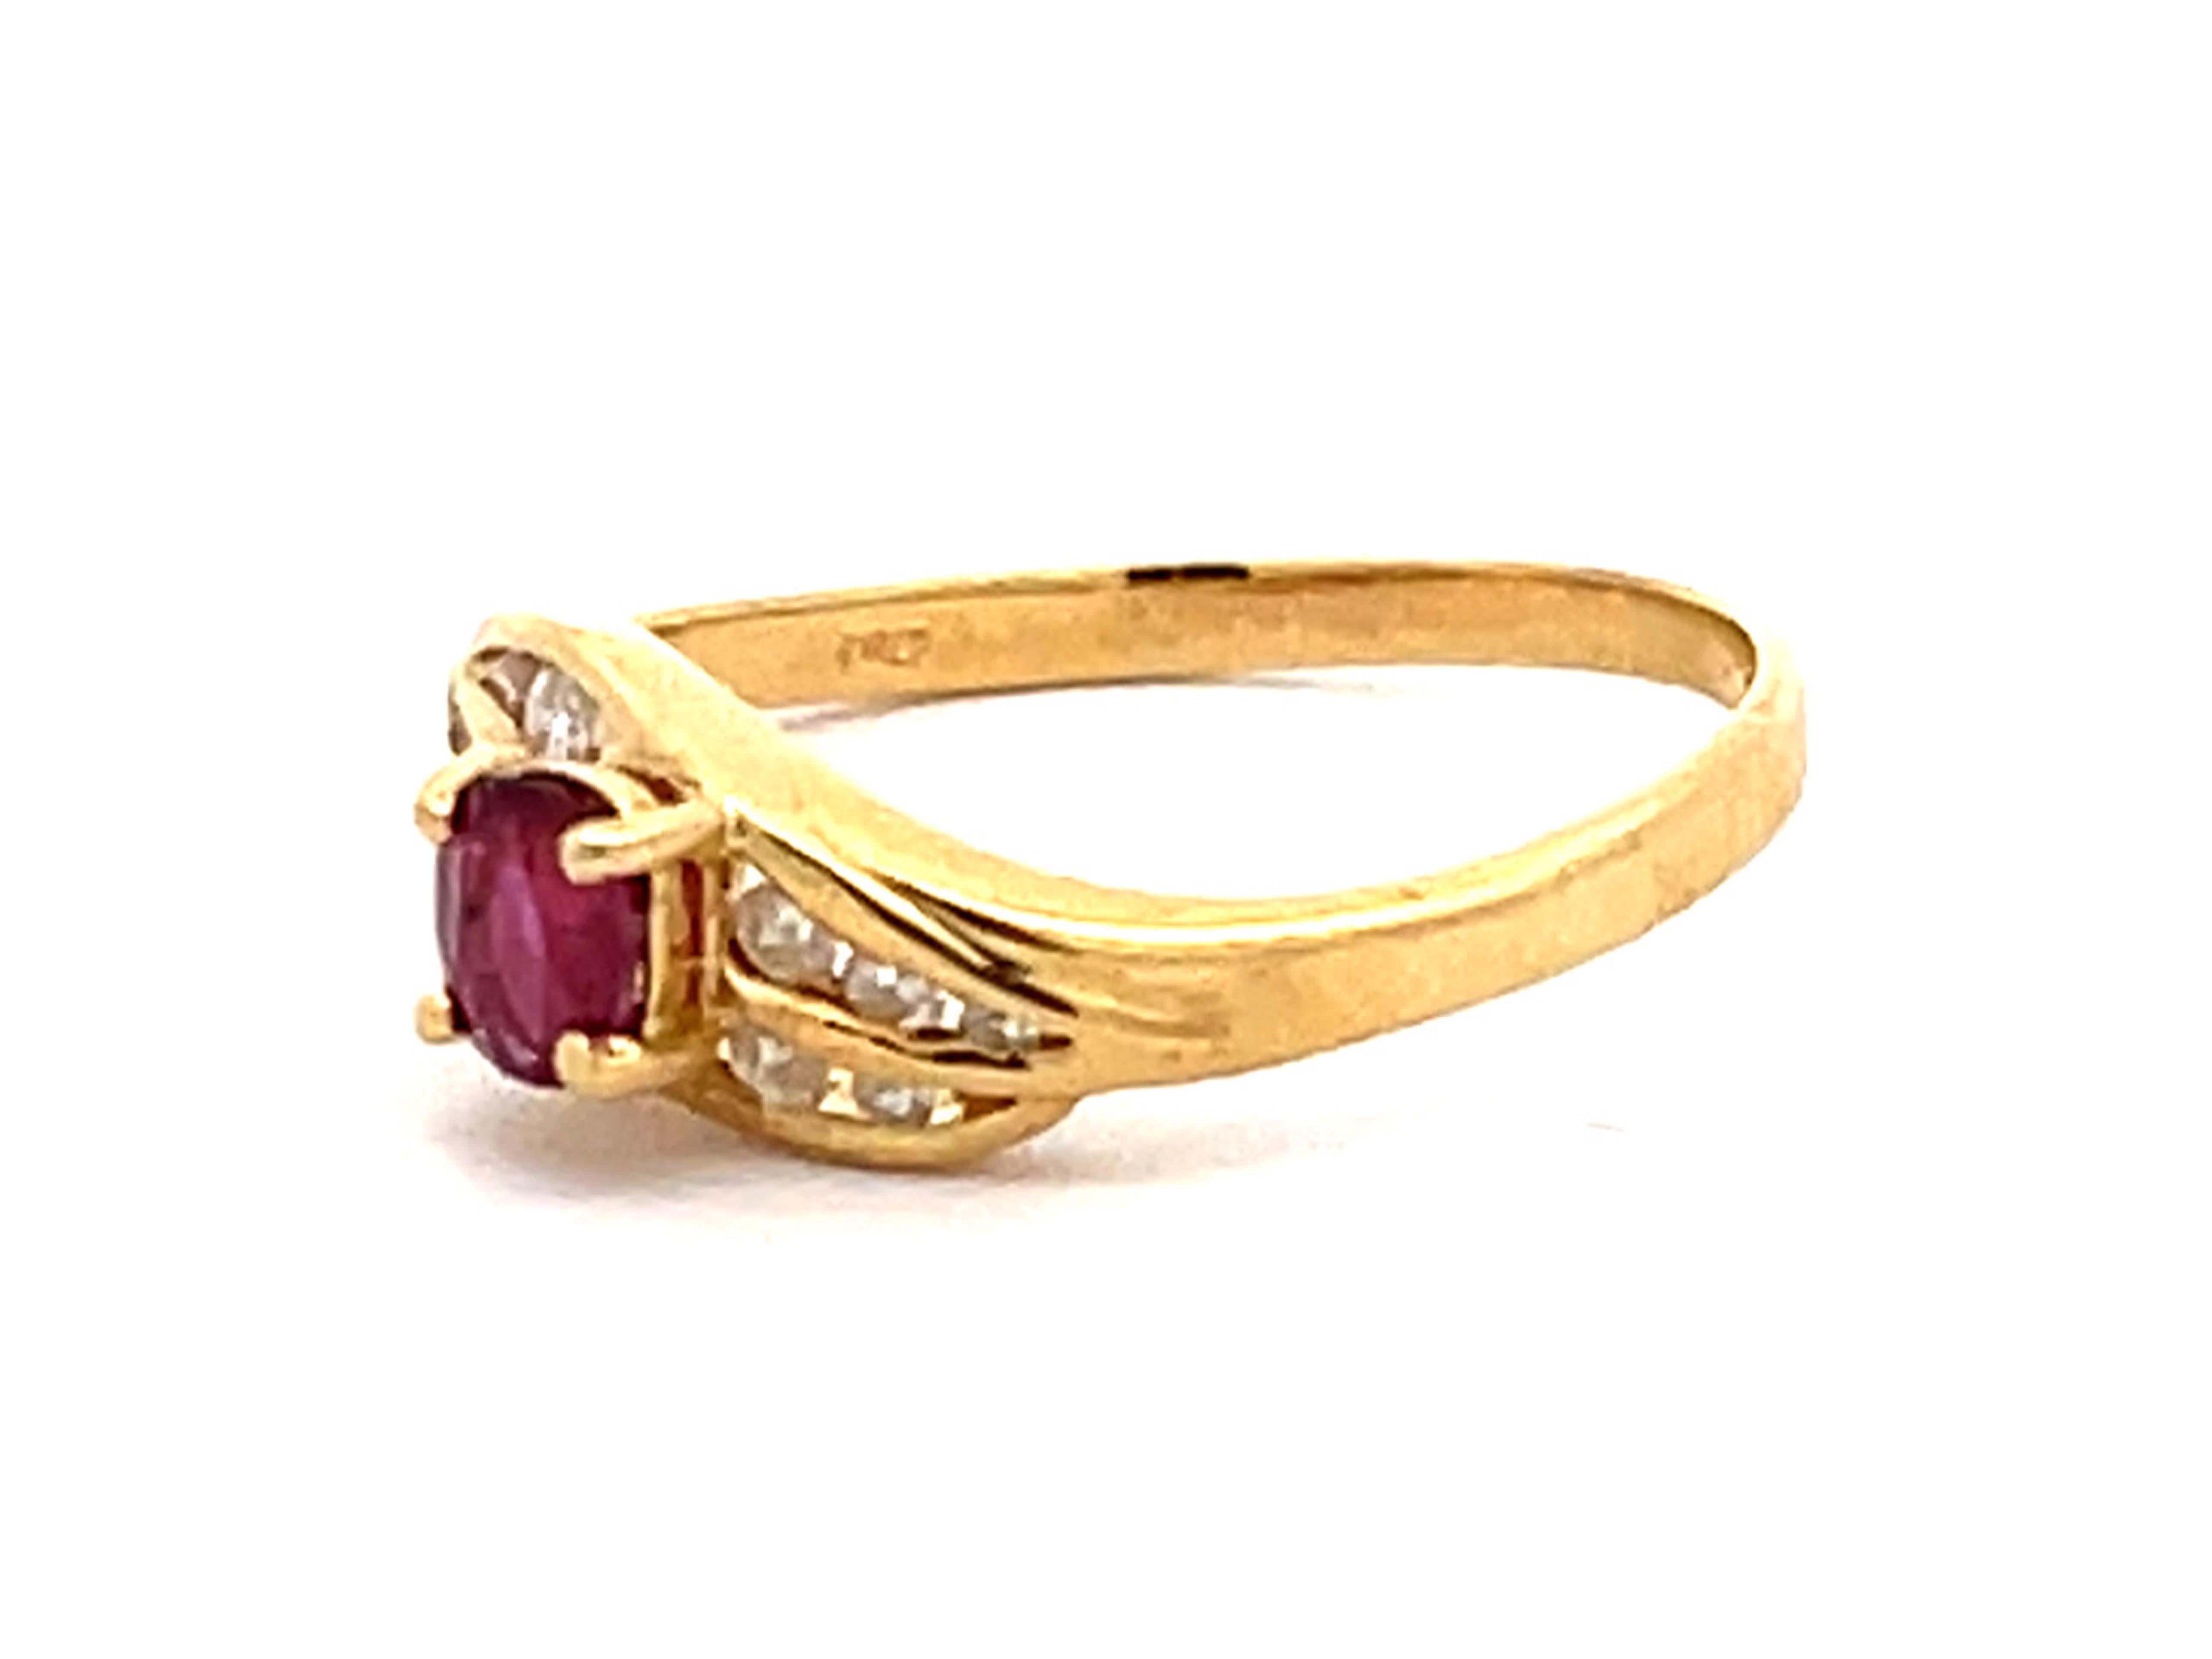 Vintage Ruby and Diamond Ring in 14k Gold In Excellent Condition For Sale In Honolulu, HI